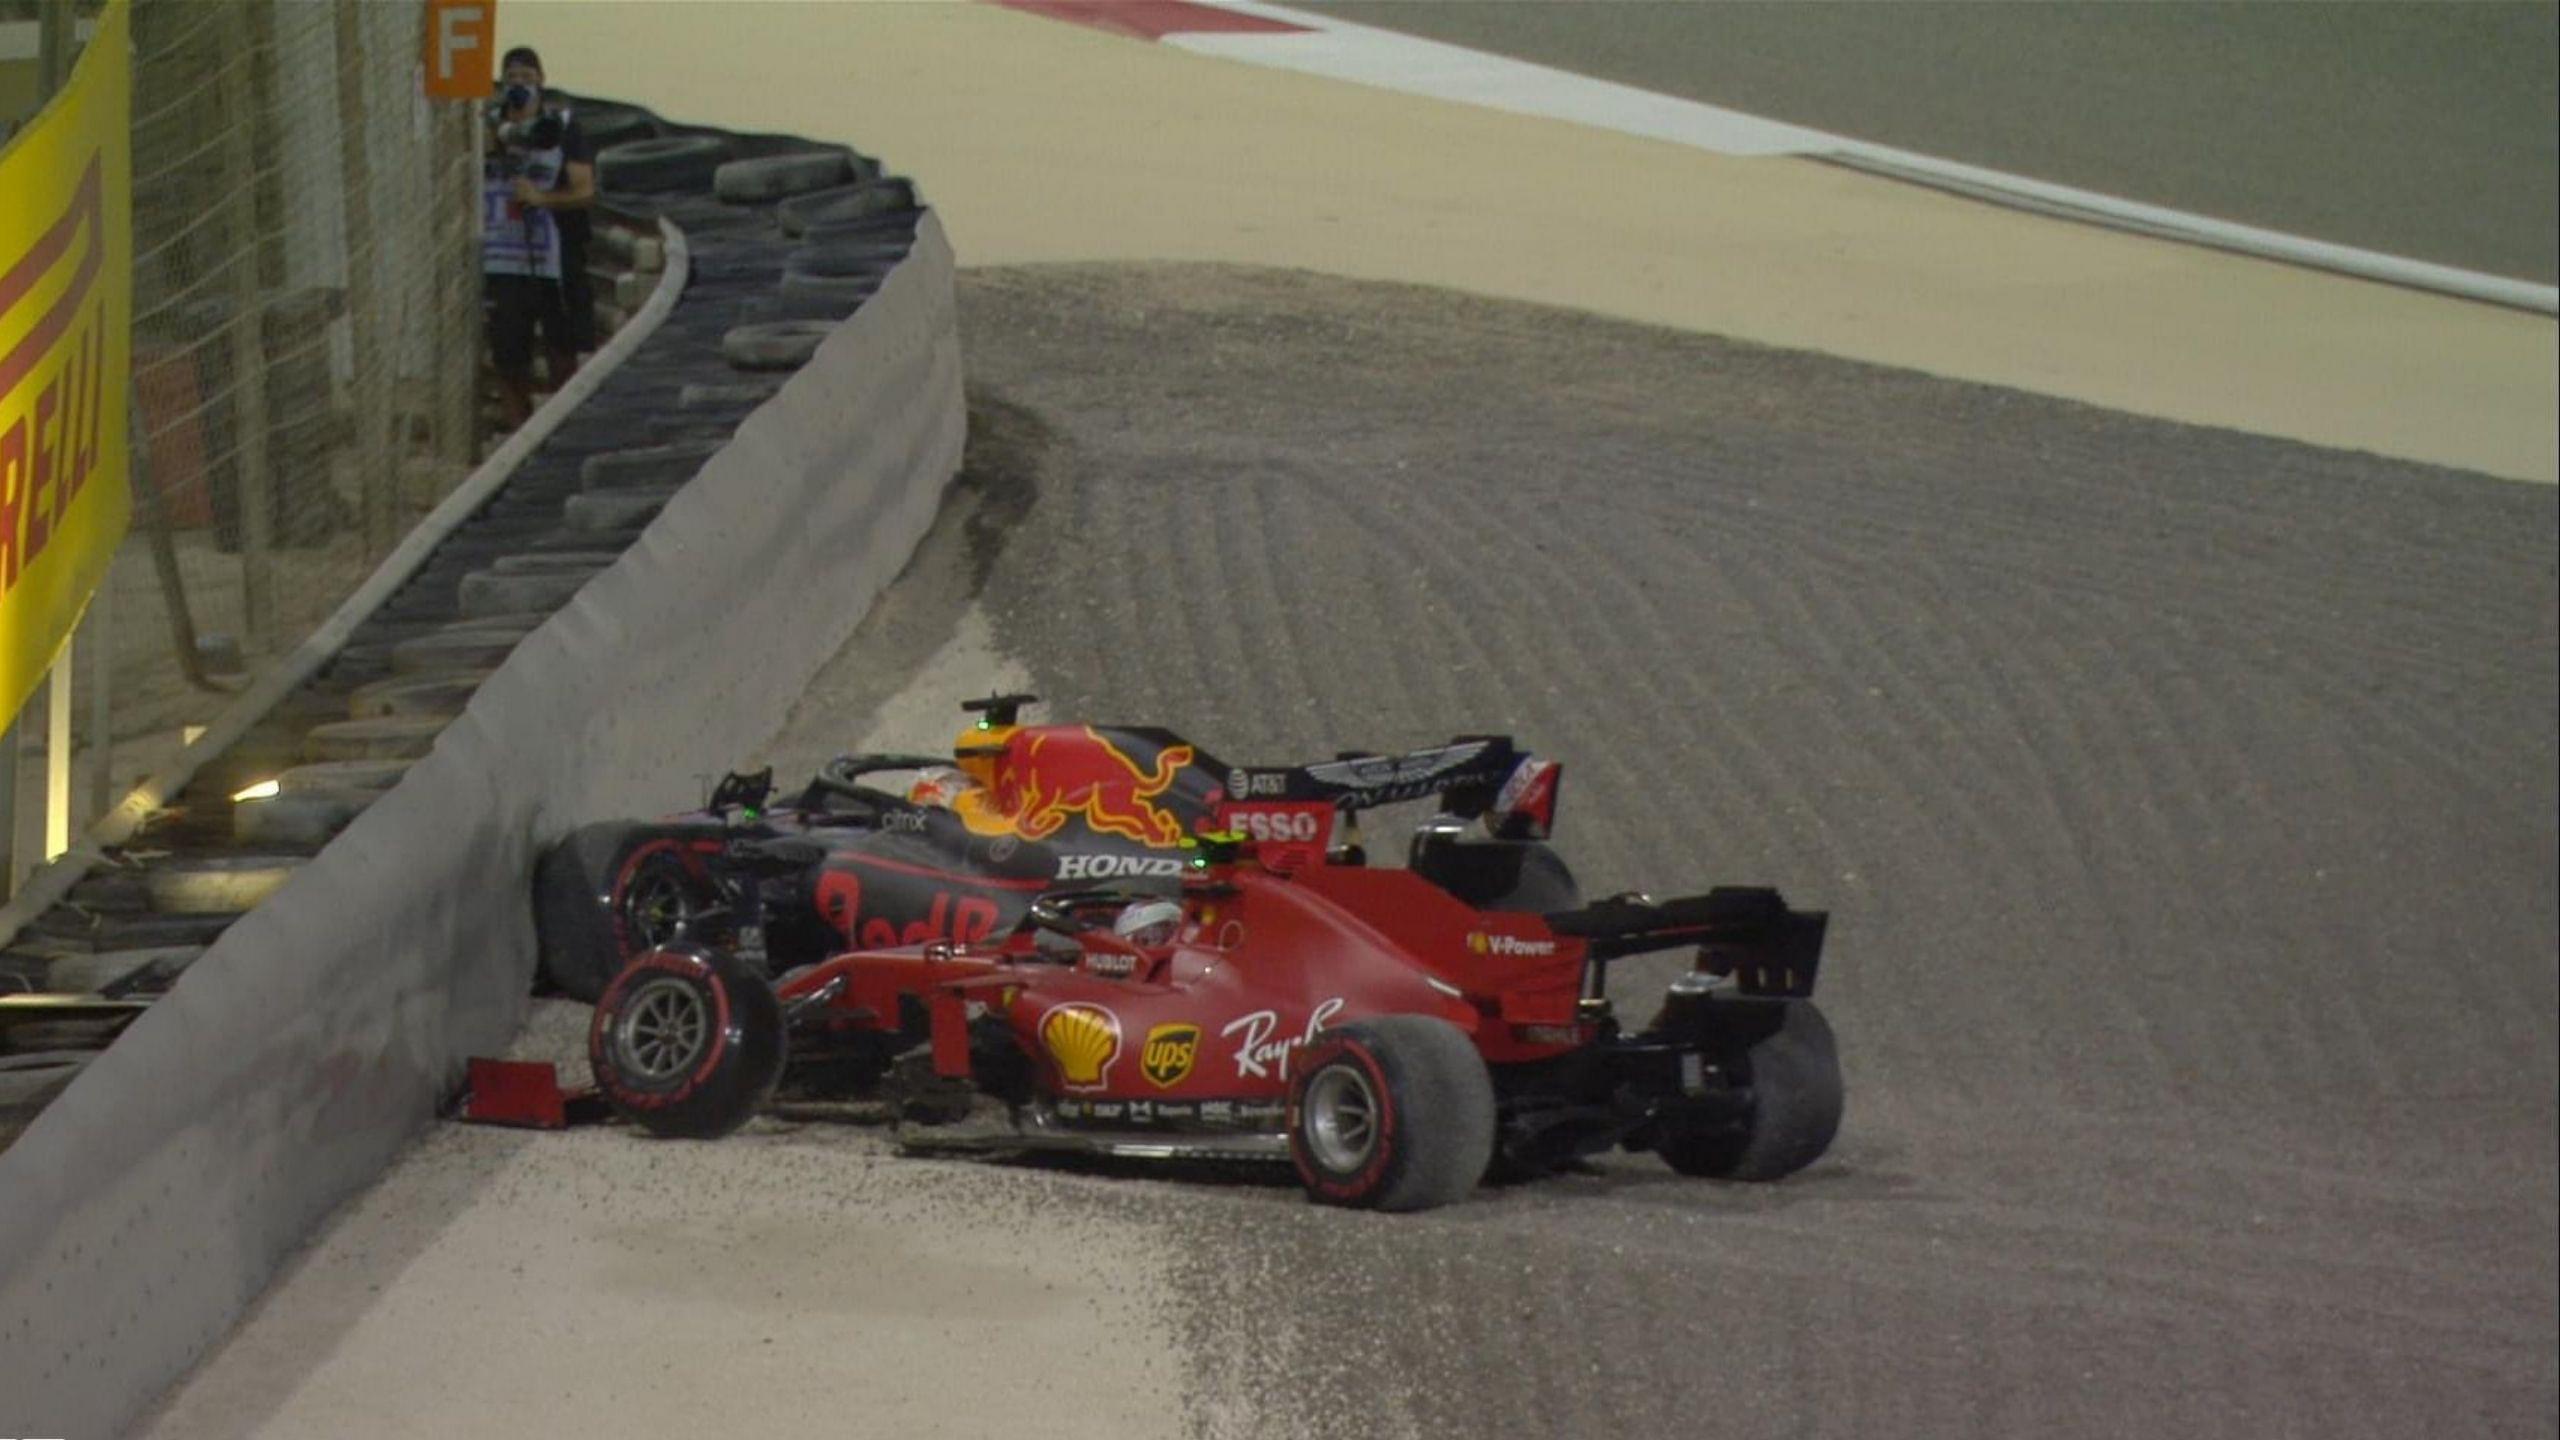 Sakhir GP: Max Verstappen and Charles Leclerc out in Lap 1 after the Red Bull and Ferrari collide